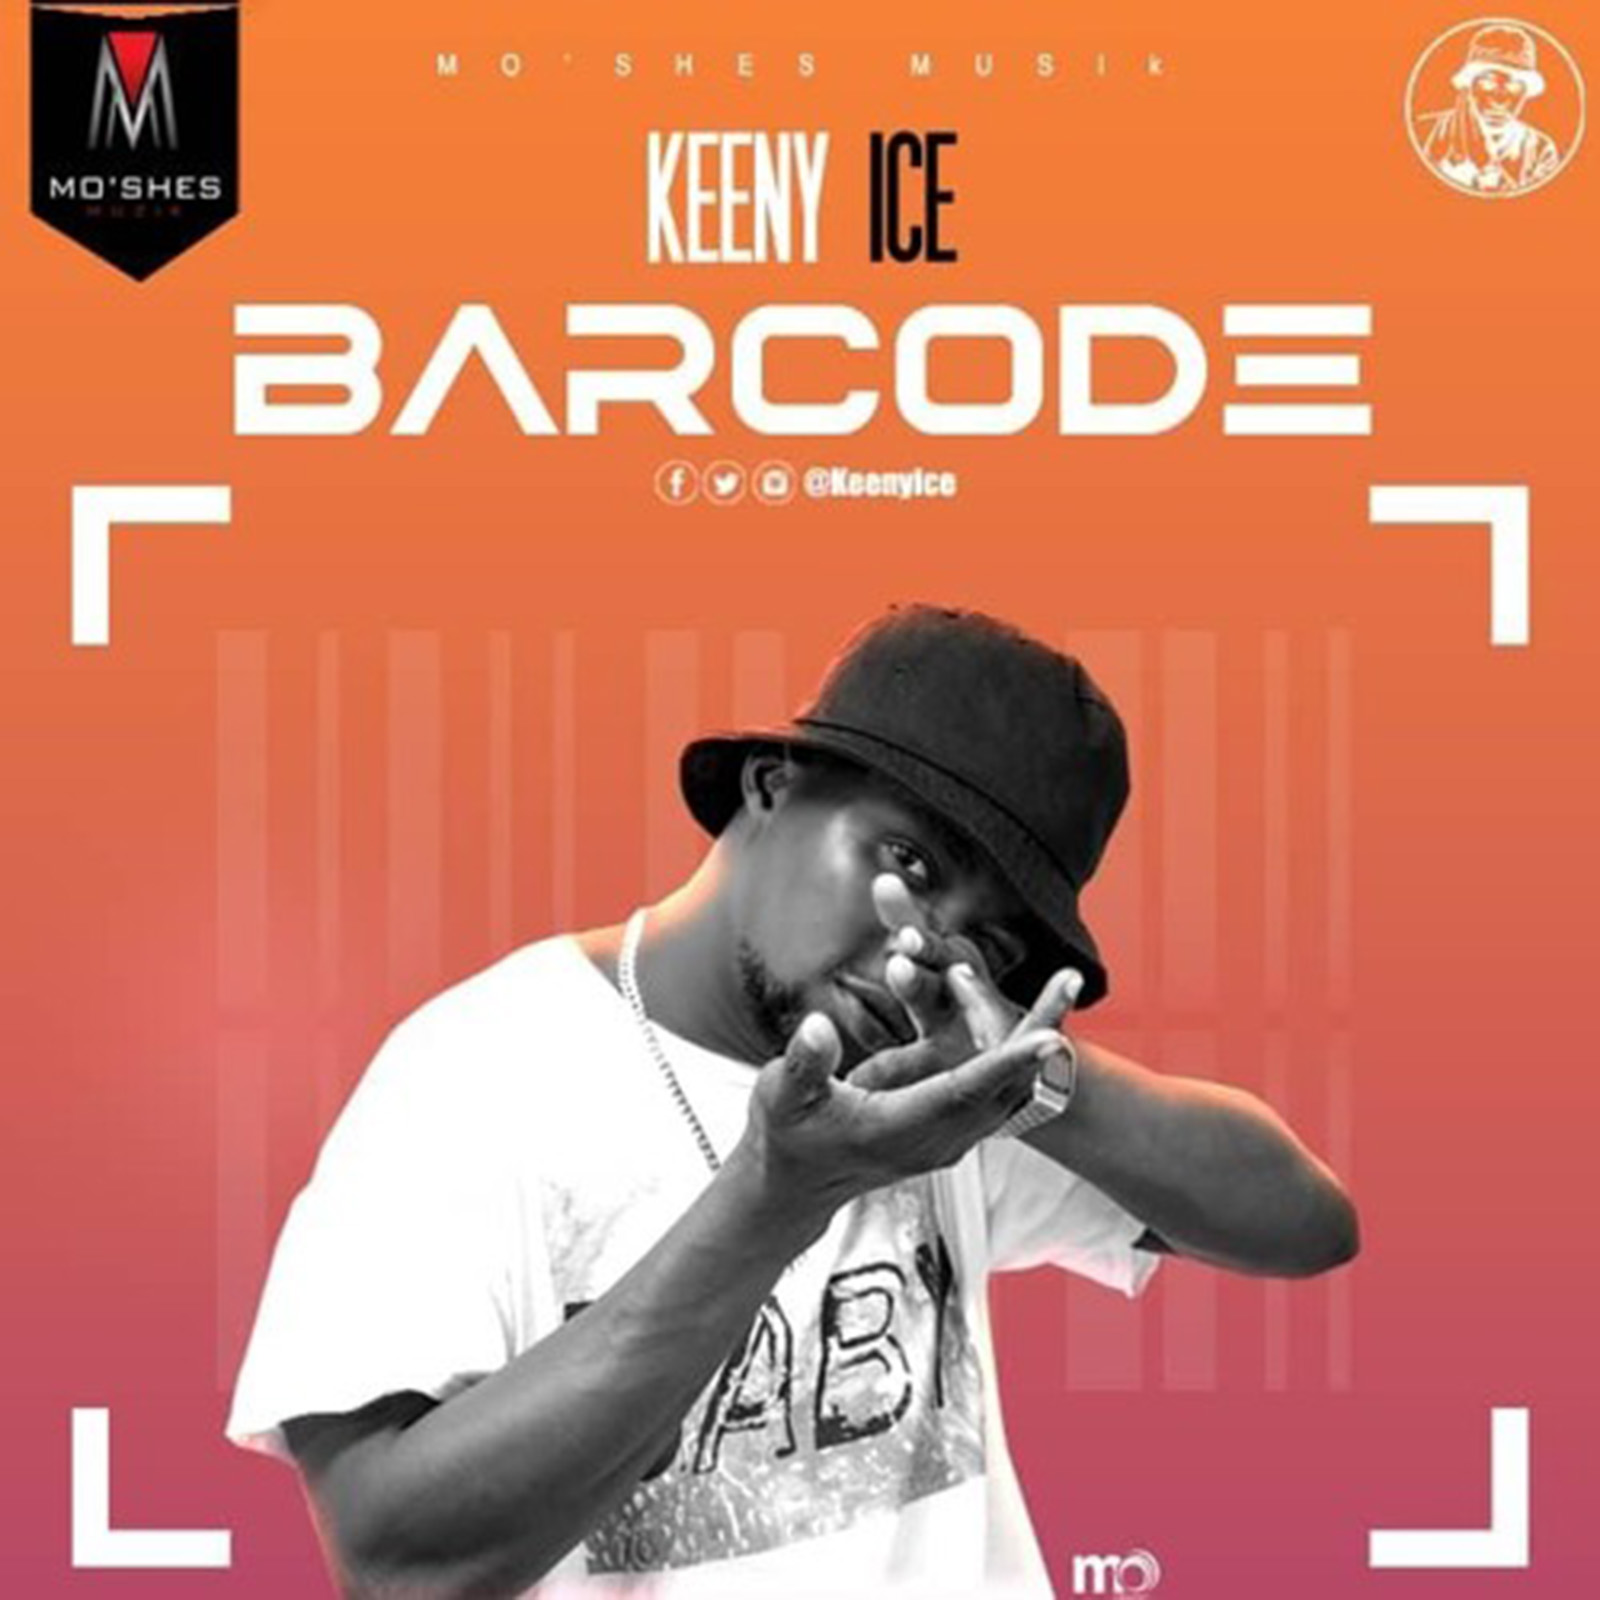 Barcode by Keeny Ice